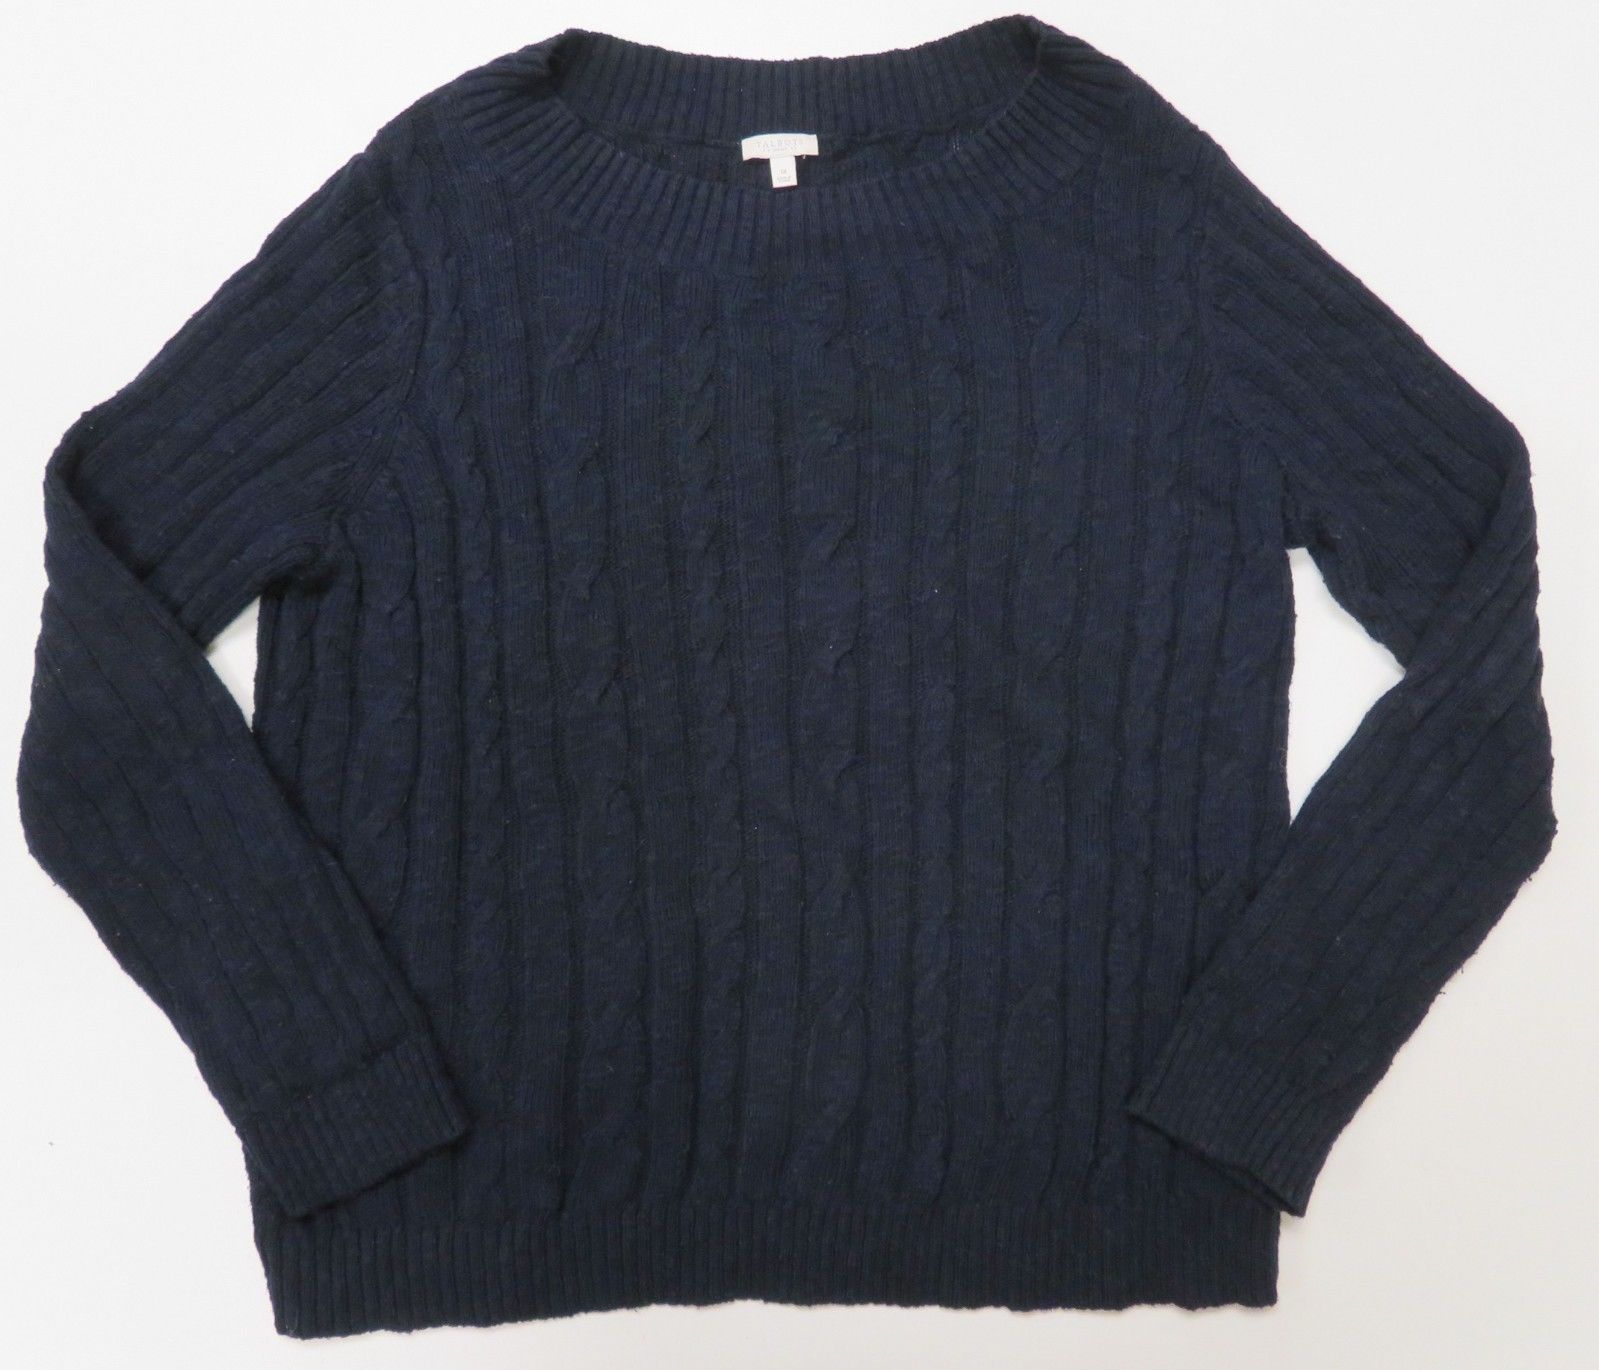 Talbots Blue Cable Knit Sweater Womens 1X Crew Neck Cotton - Sweaters